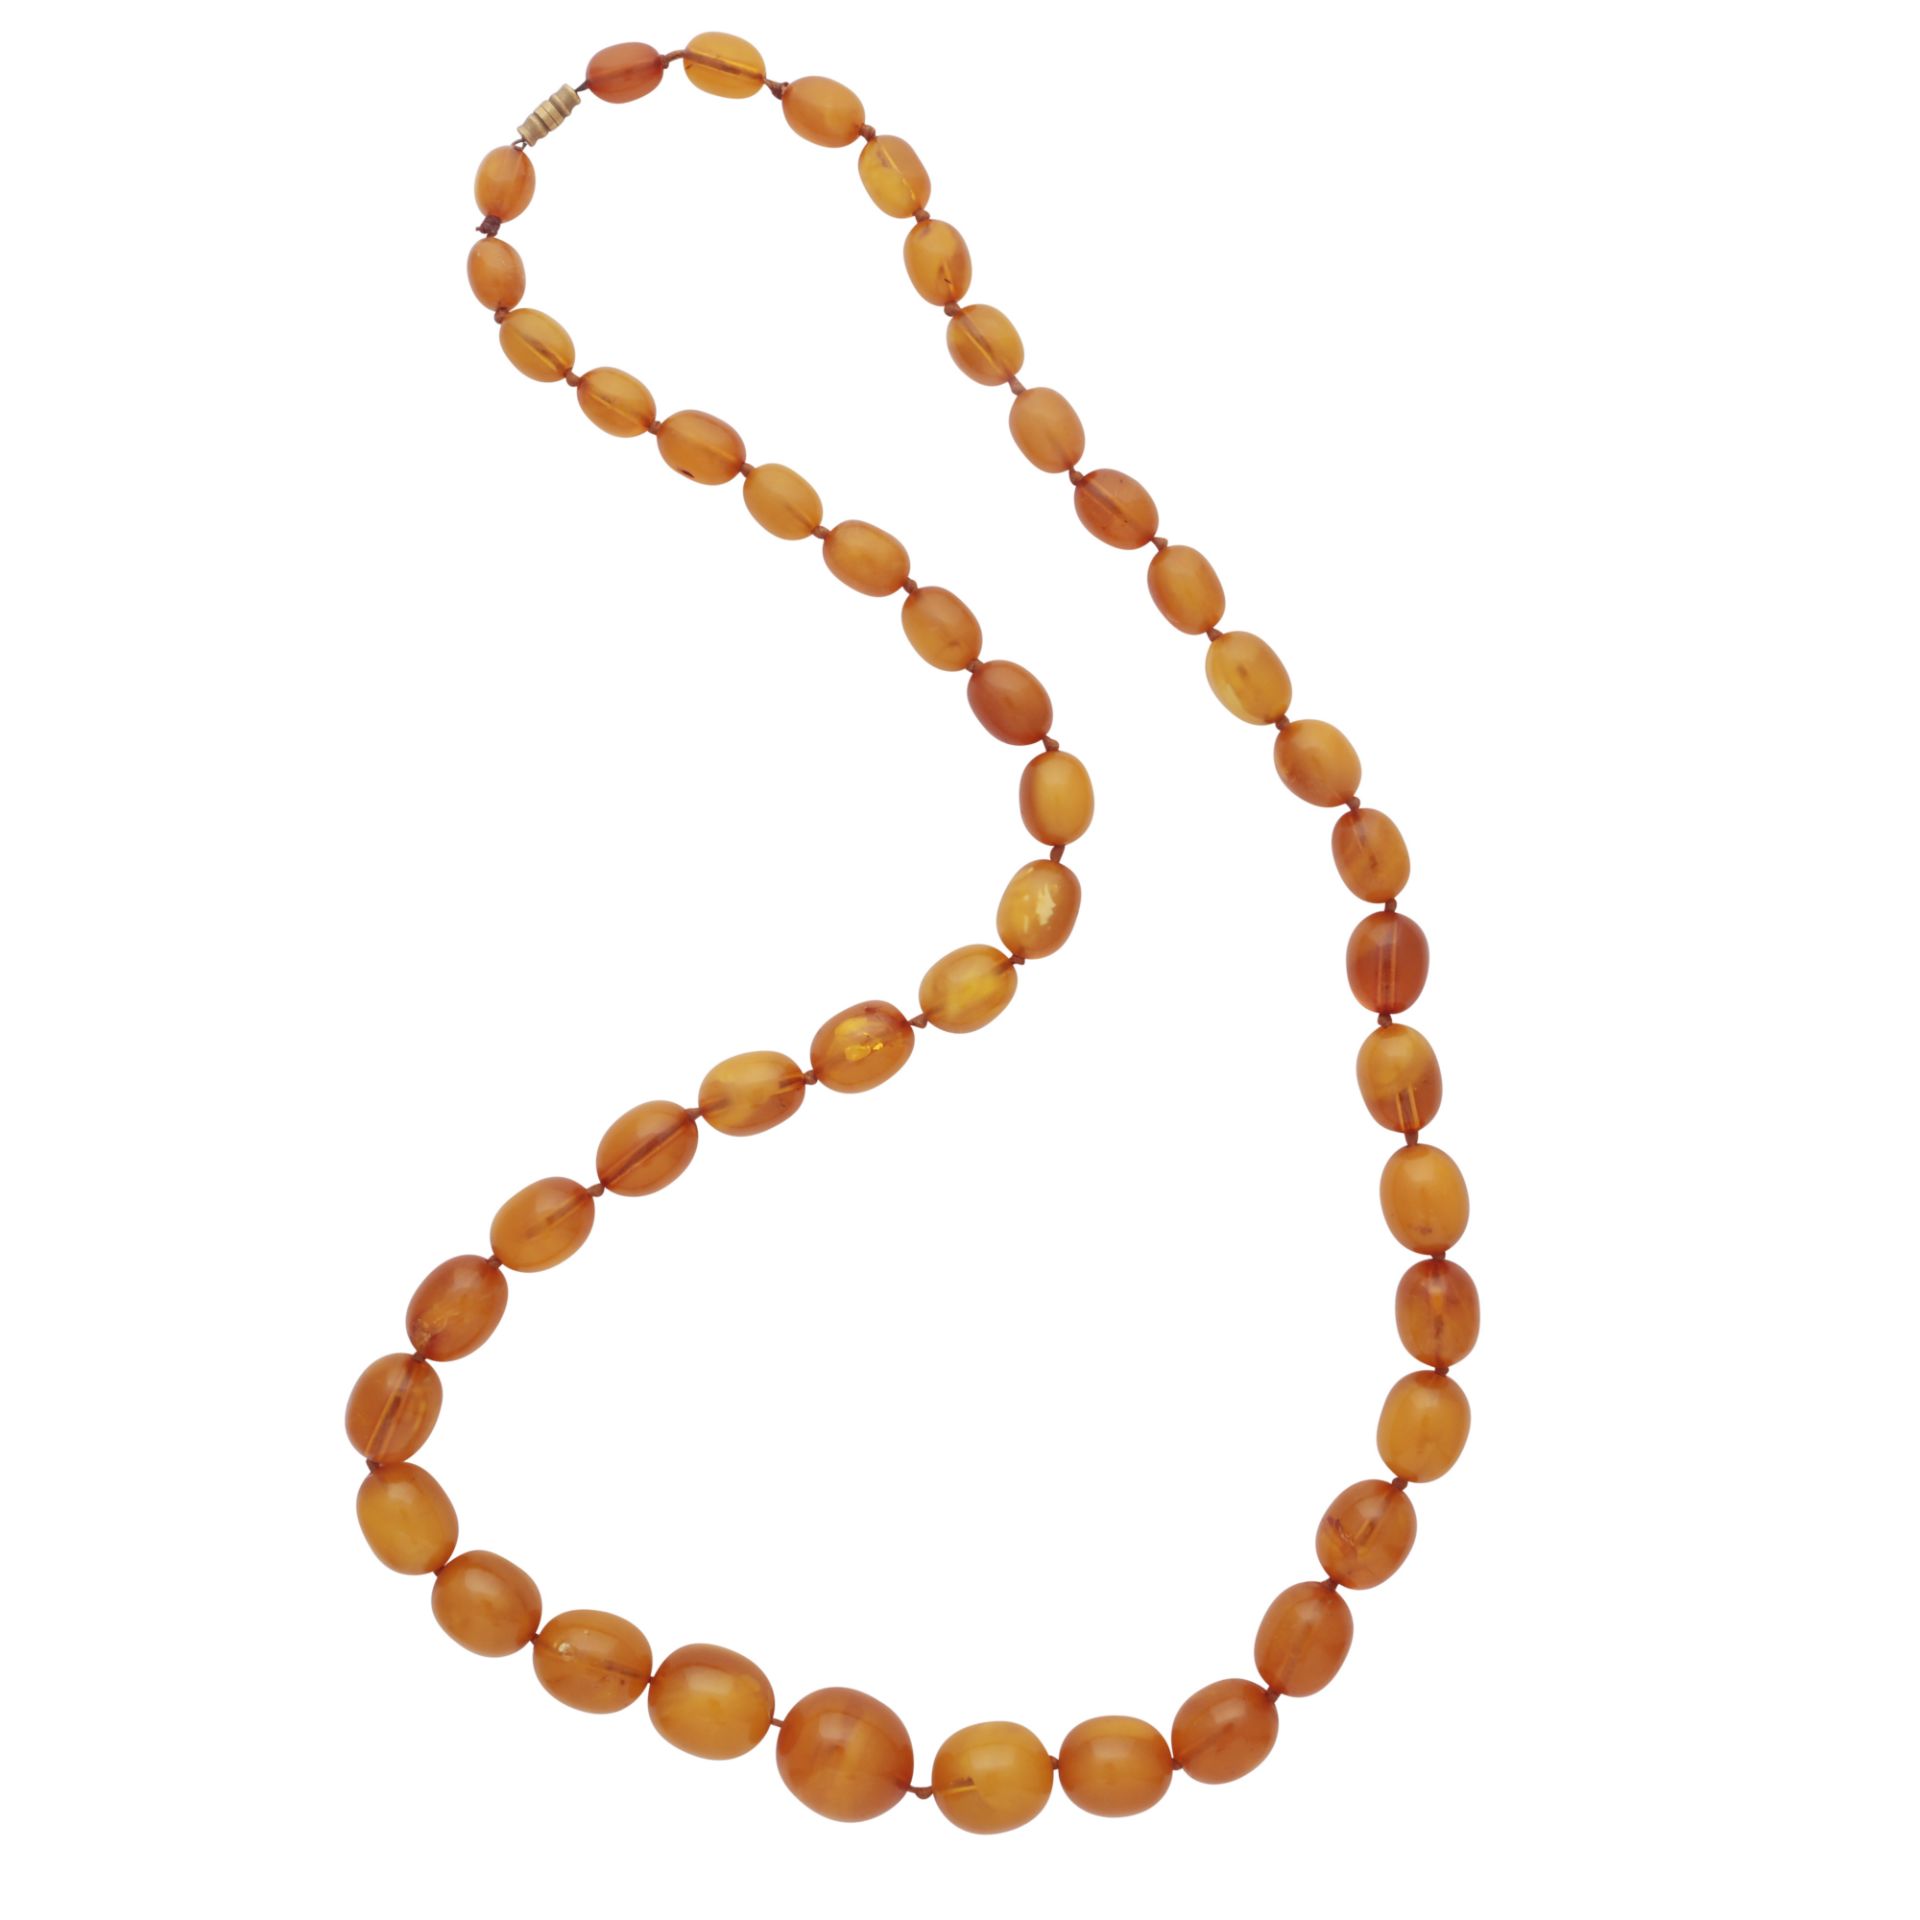 An antique natural amber bead necklace the single string of graduated, oval, polished beads